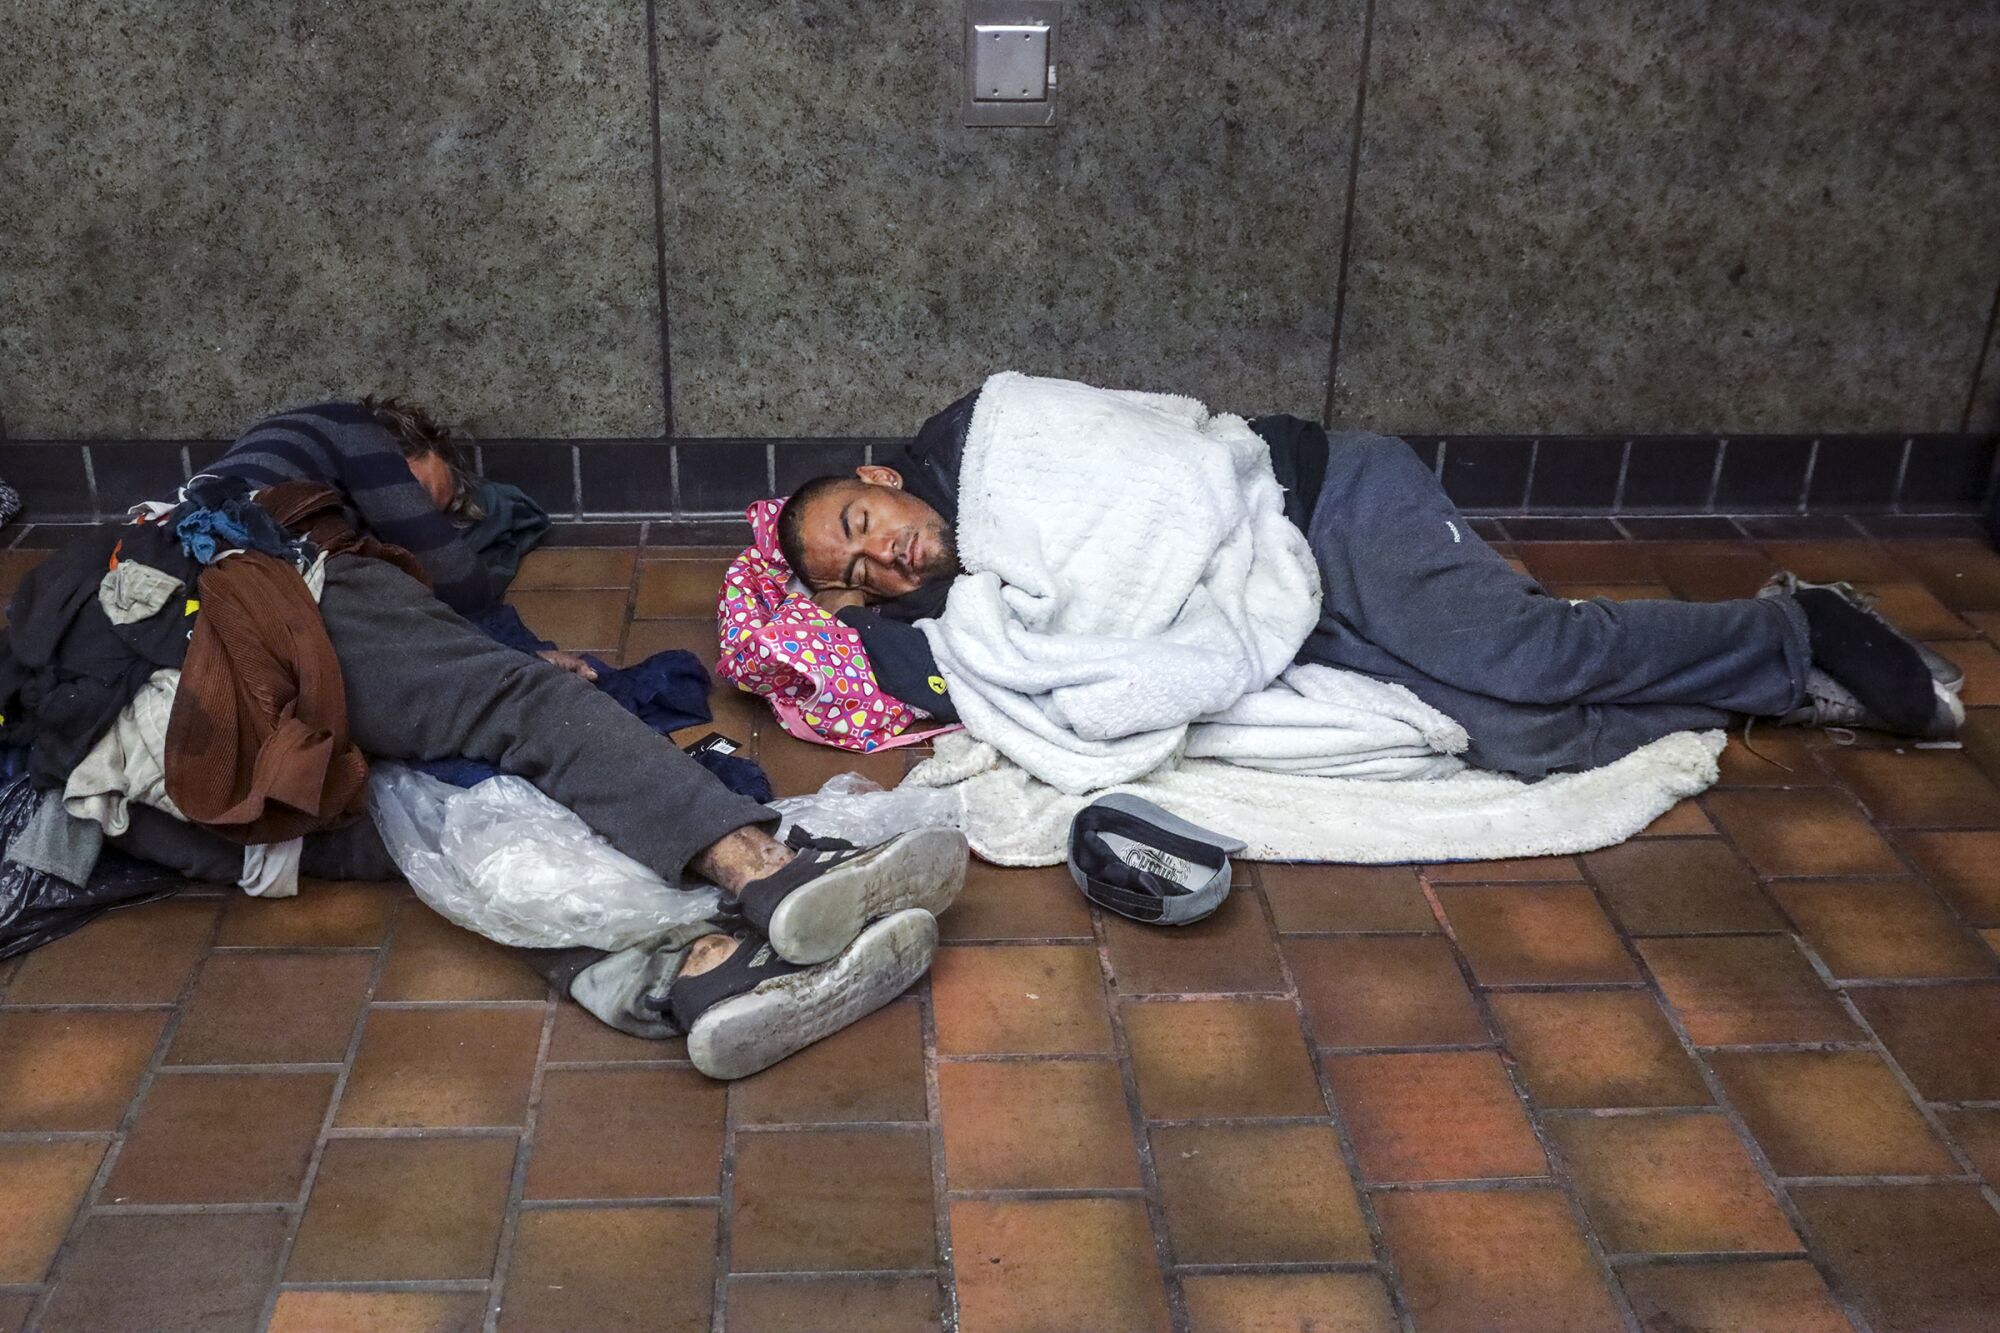 Homeless persons sleep in front of the closed gates of the 7th. Street Metro station in Los Angeles.